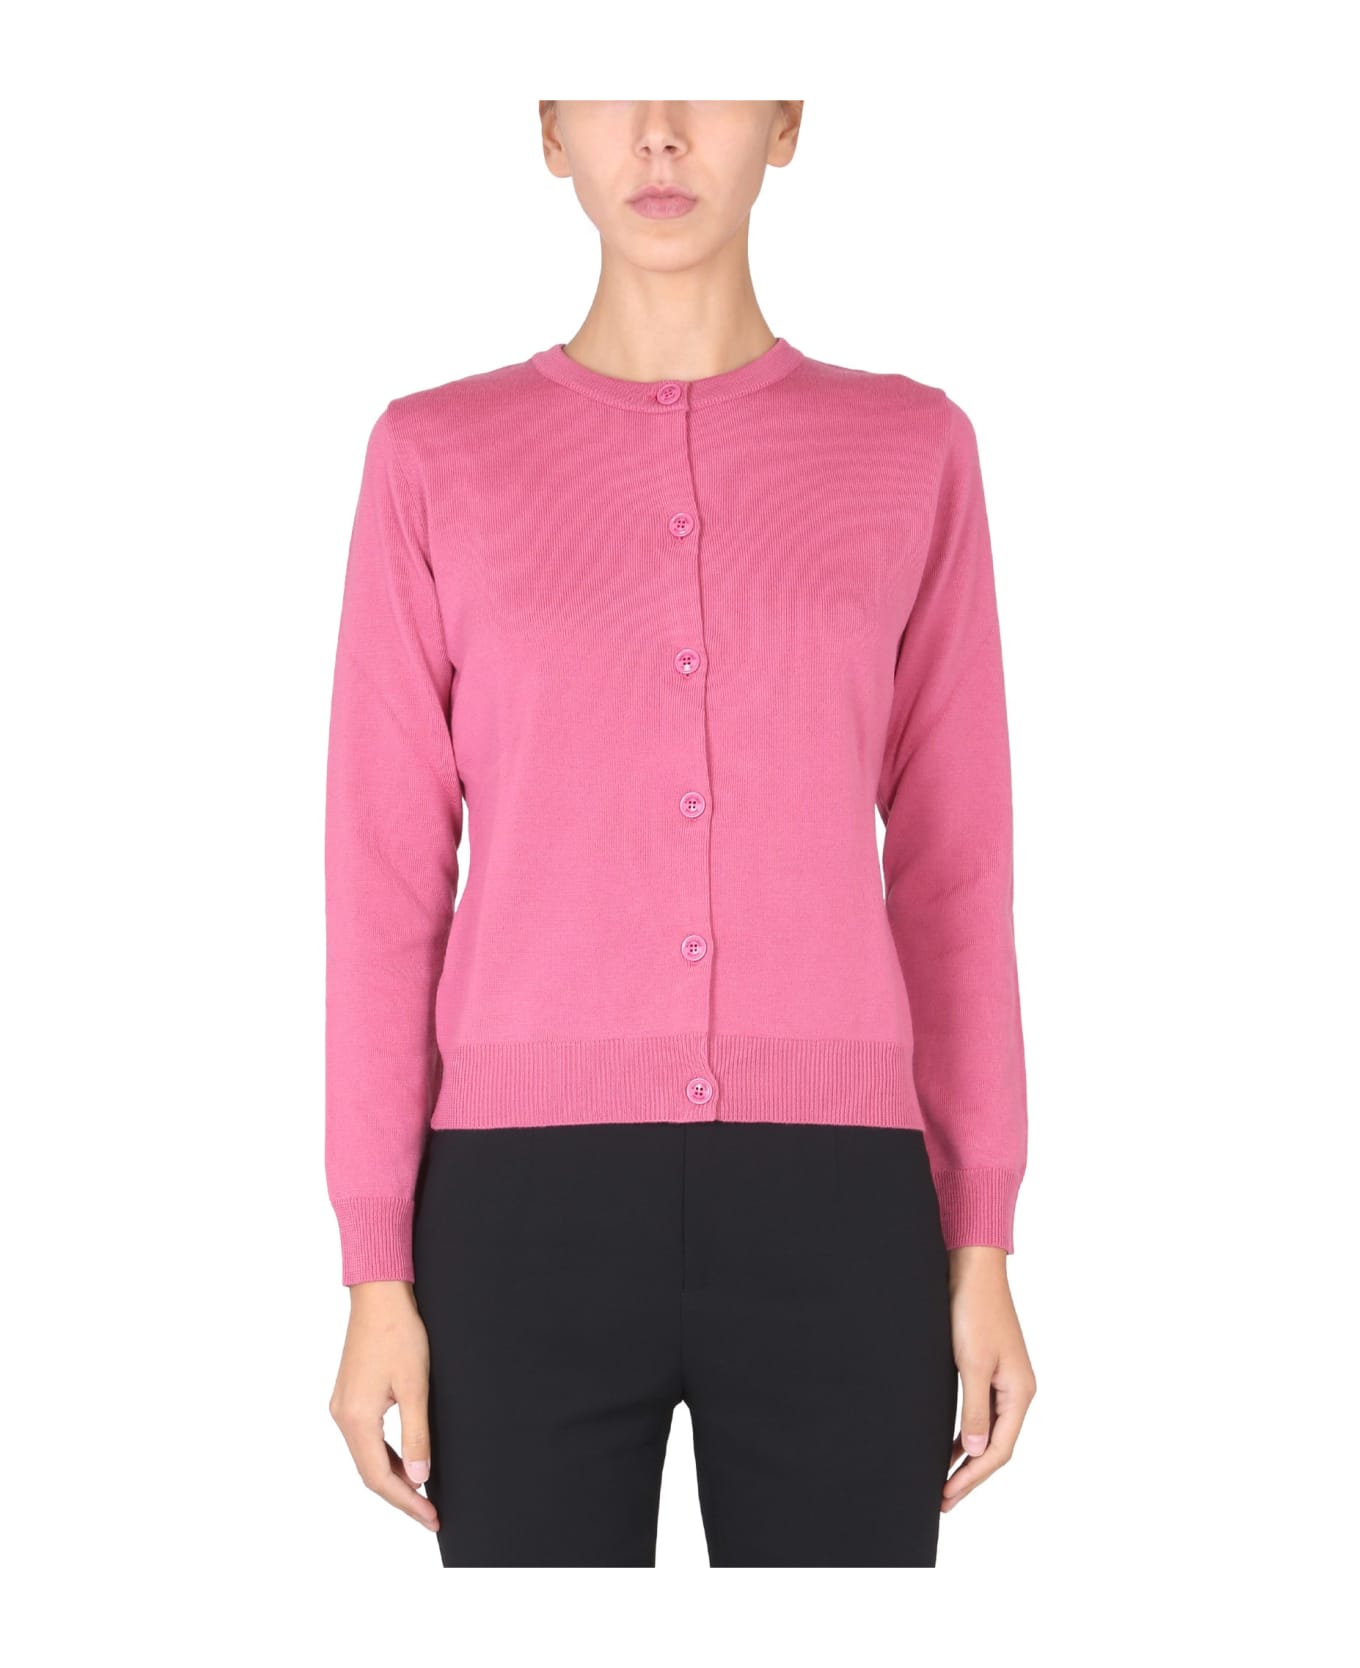 Boutique Moschino Wool Jersey. - ROSA